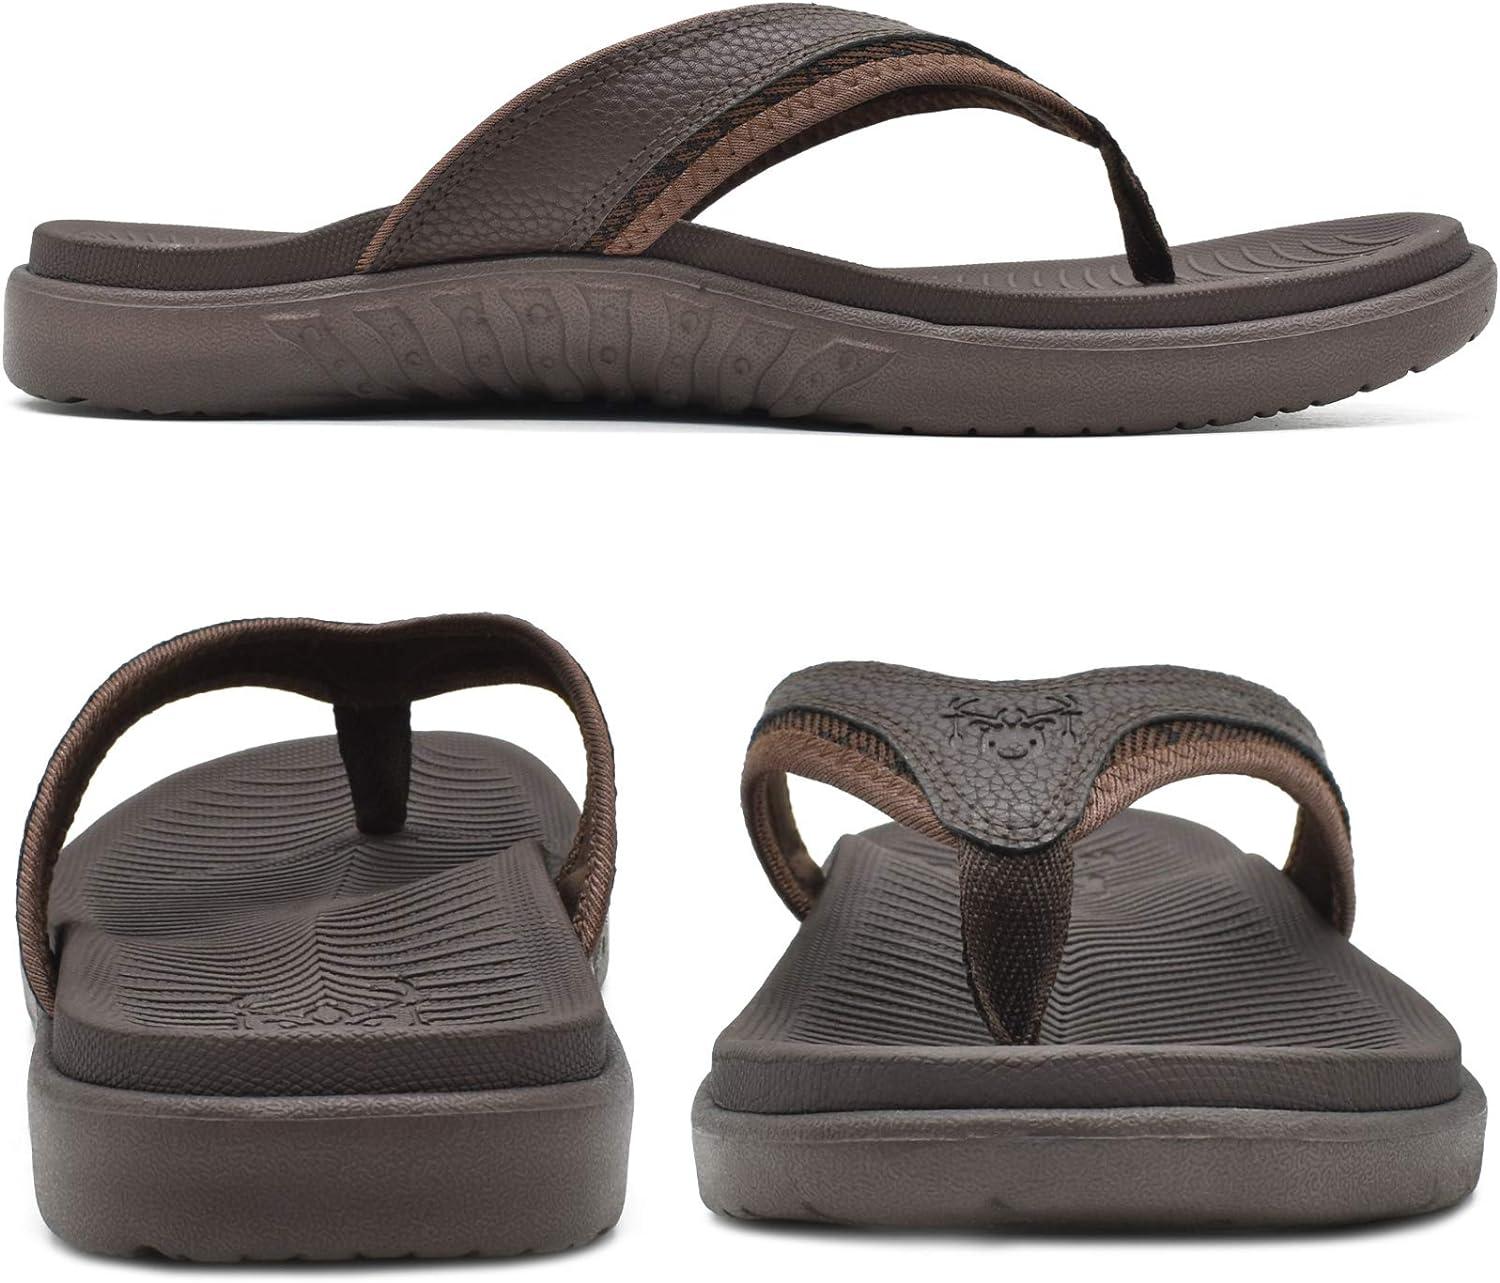  KuaiLu Womens Yoga Mat Flip Flops Comfortable Arch Support  Non-slip Thong Sandals with Fashion Leather Straps for Outdoor Summer Beach  Grey Size 5